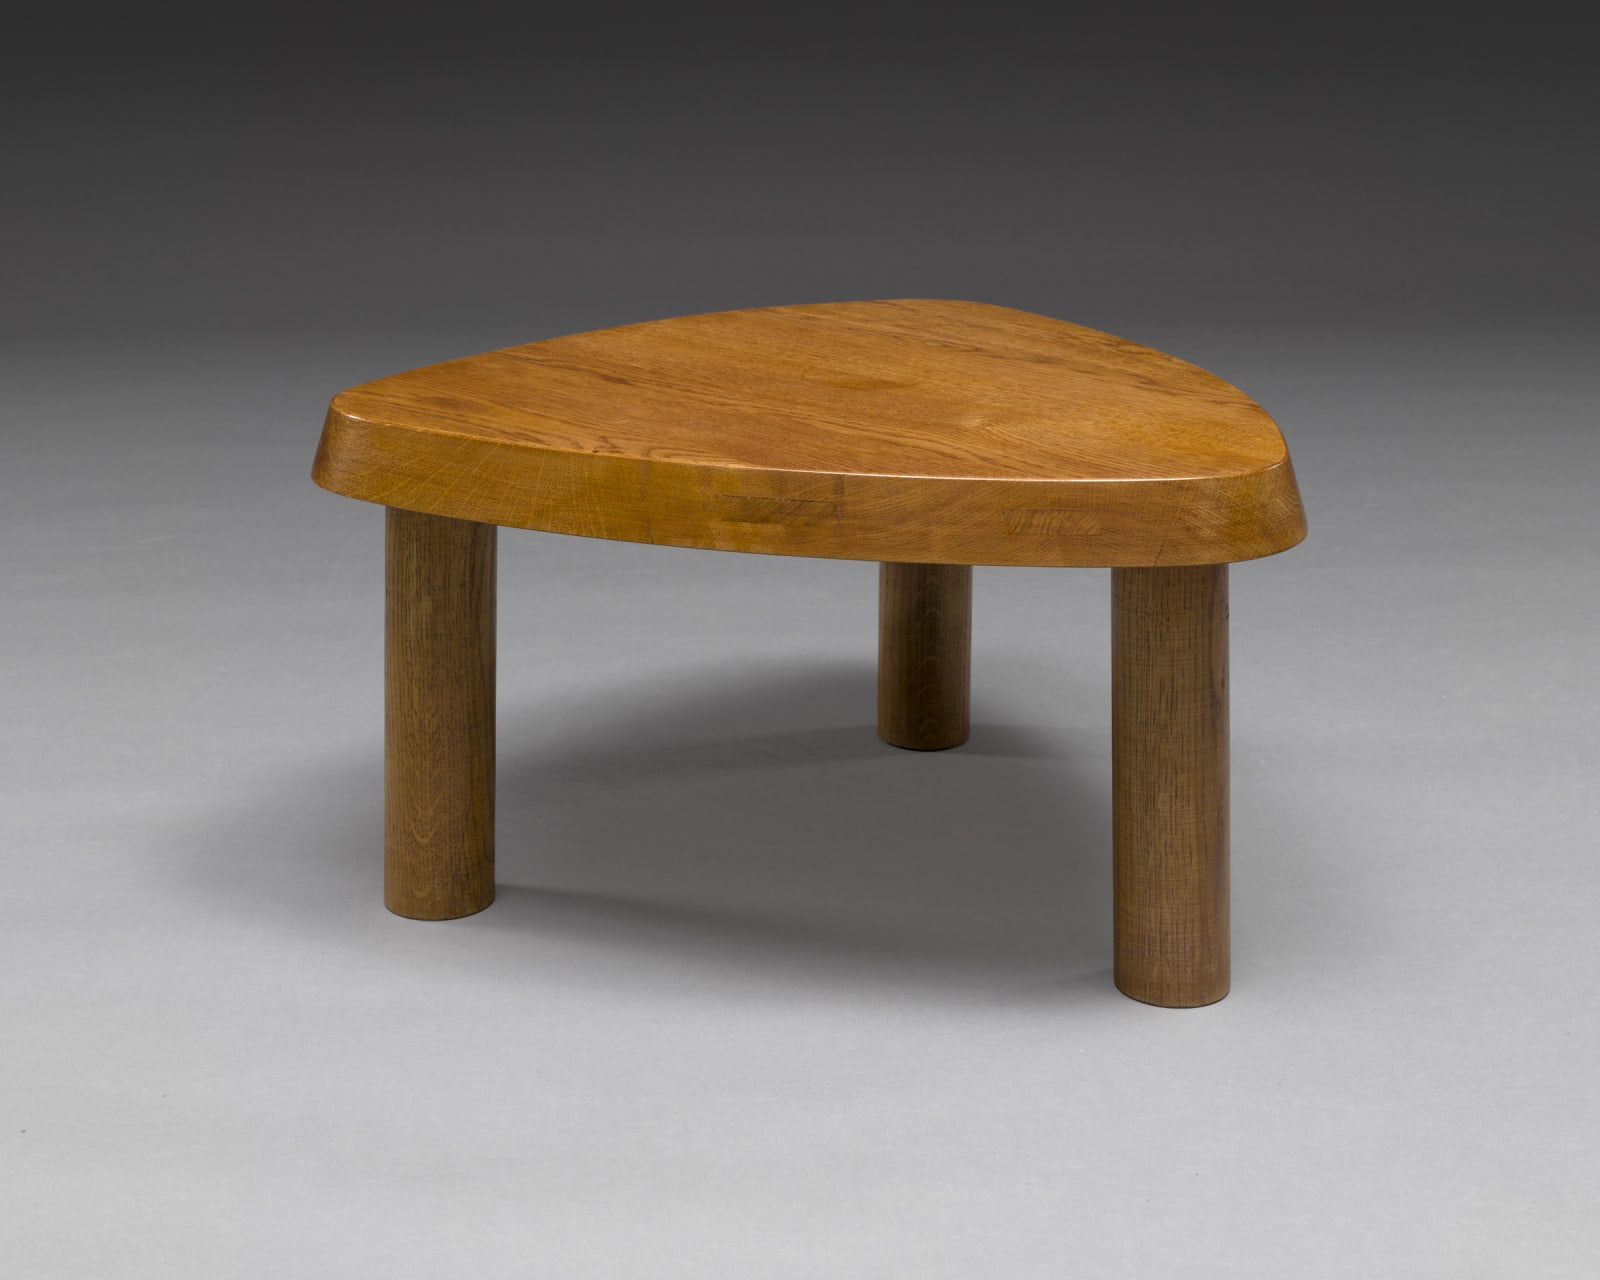 Pierre Chapo, T23A Coffee Table, c. 1970